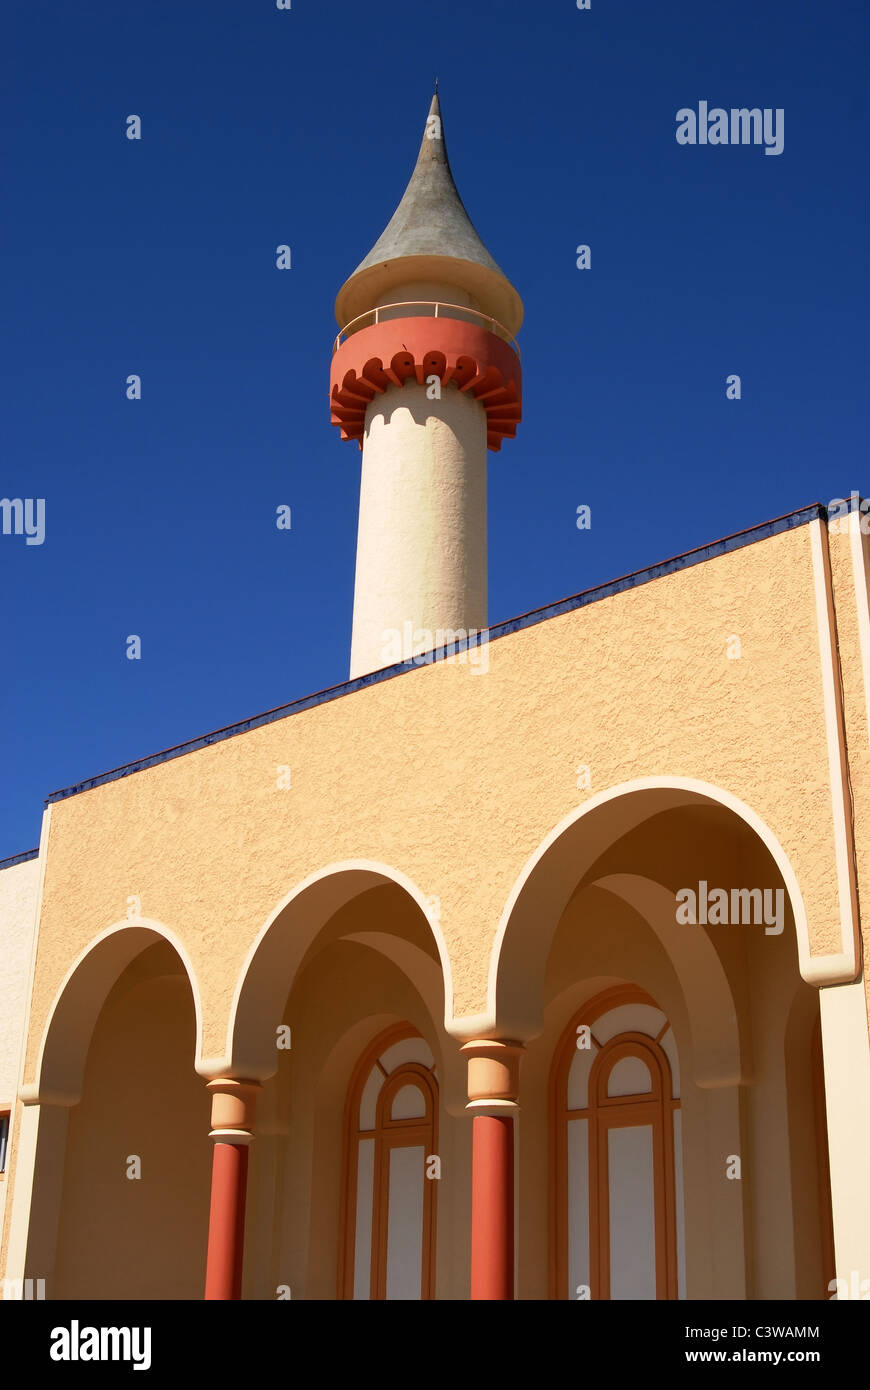 Landmark building detail. Tower and arcades on blue sky background Stock Photo